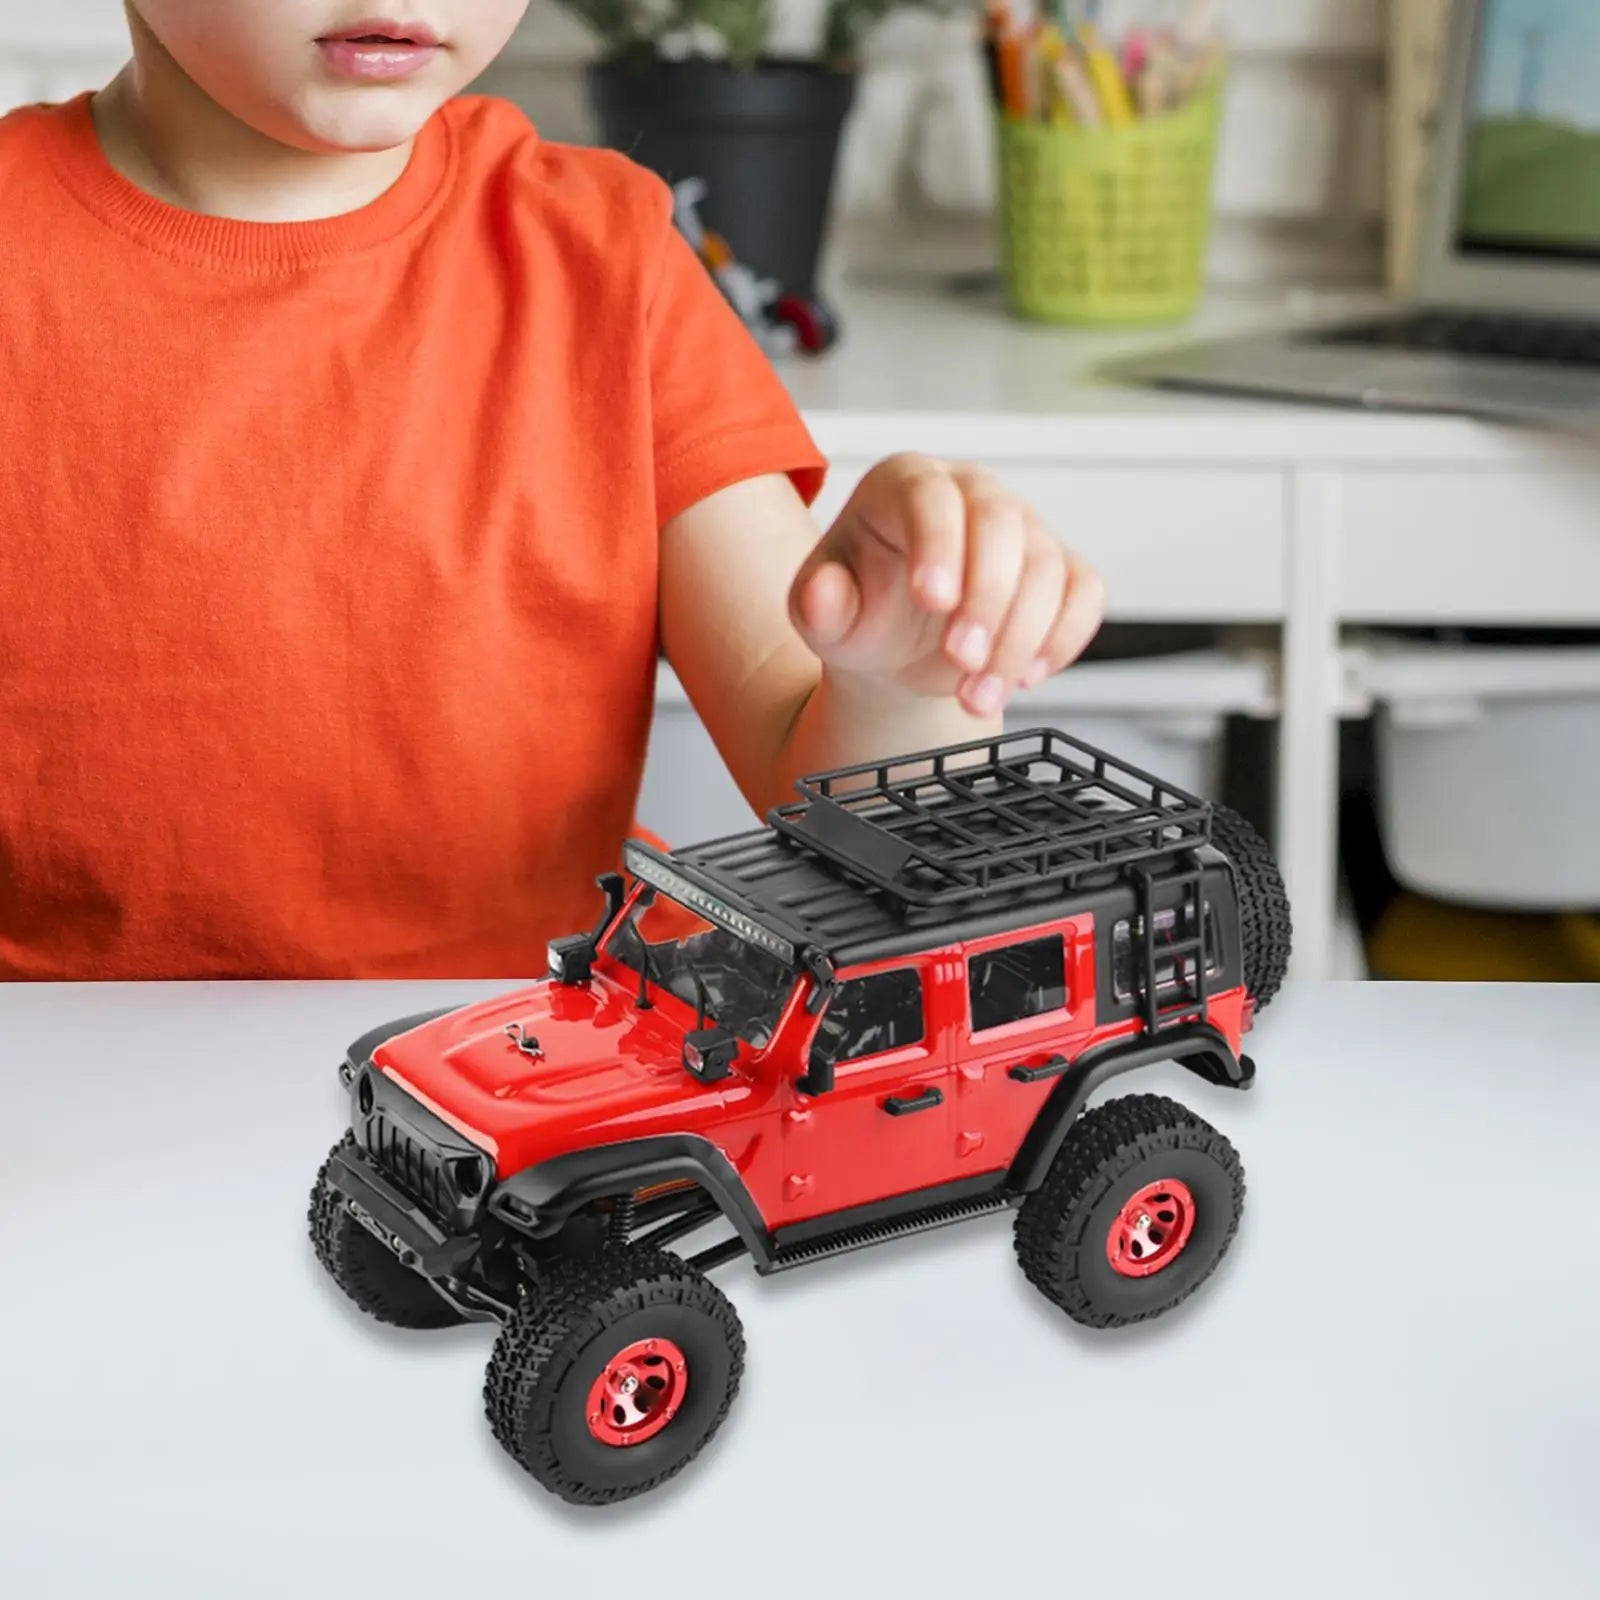 4WD RC Cars Electric RC Crawler Vehicle for Wltoys